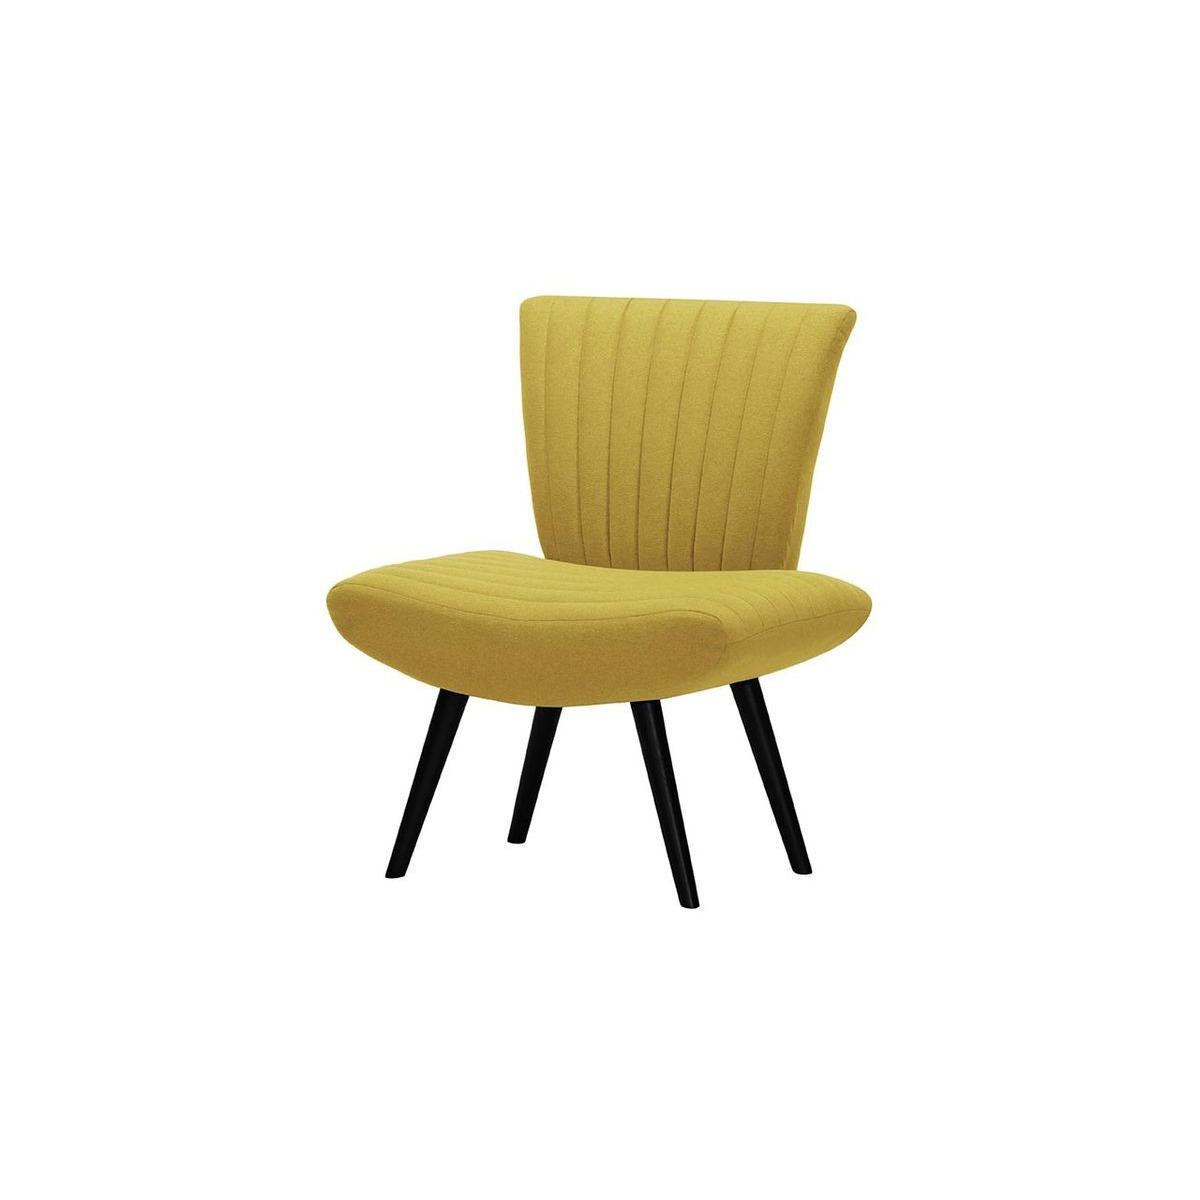 Tago Chair, yellow - image 1